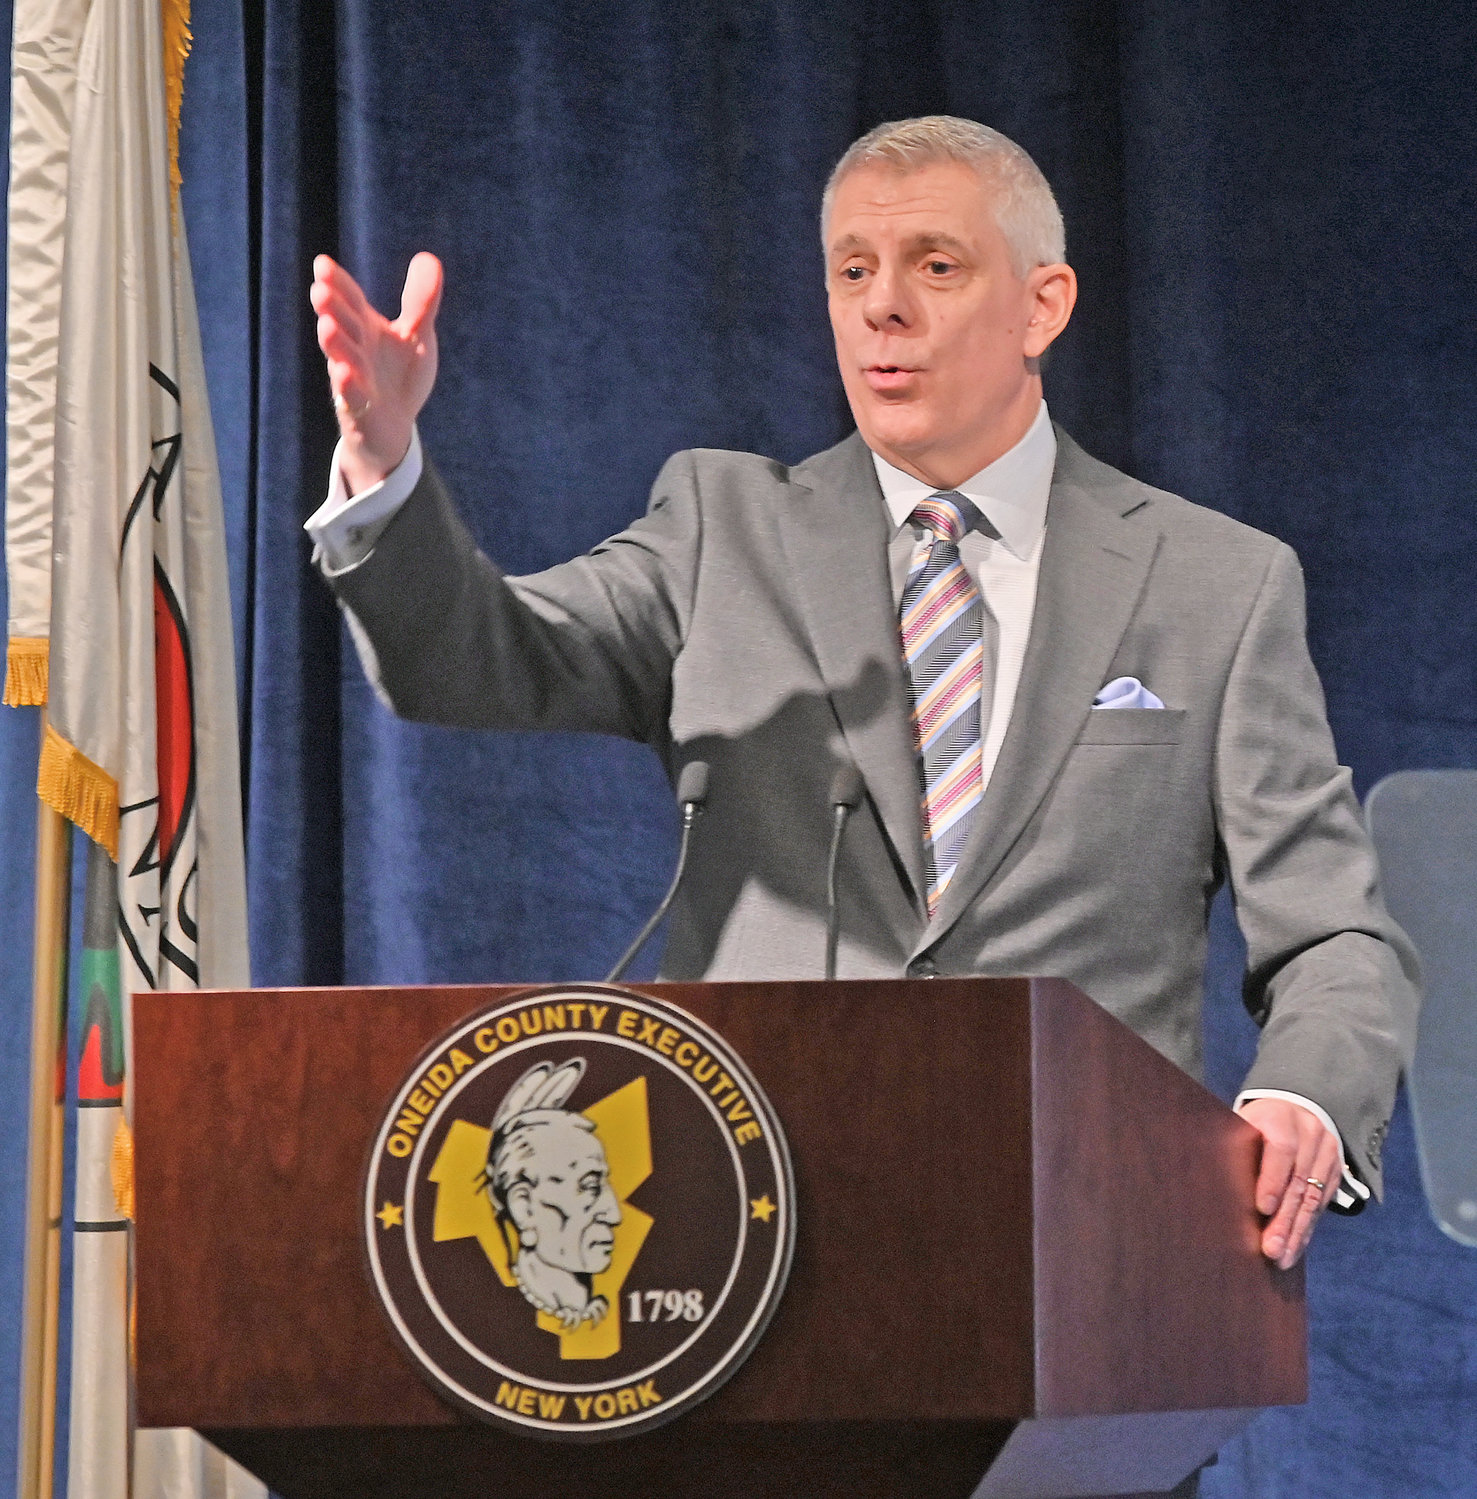 MAKING A POINT — Oneida County Executive Anthony J. Picente Jr. gestures to his audience while making a point during his State of the County address on Wednesday.